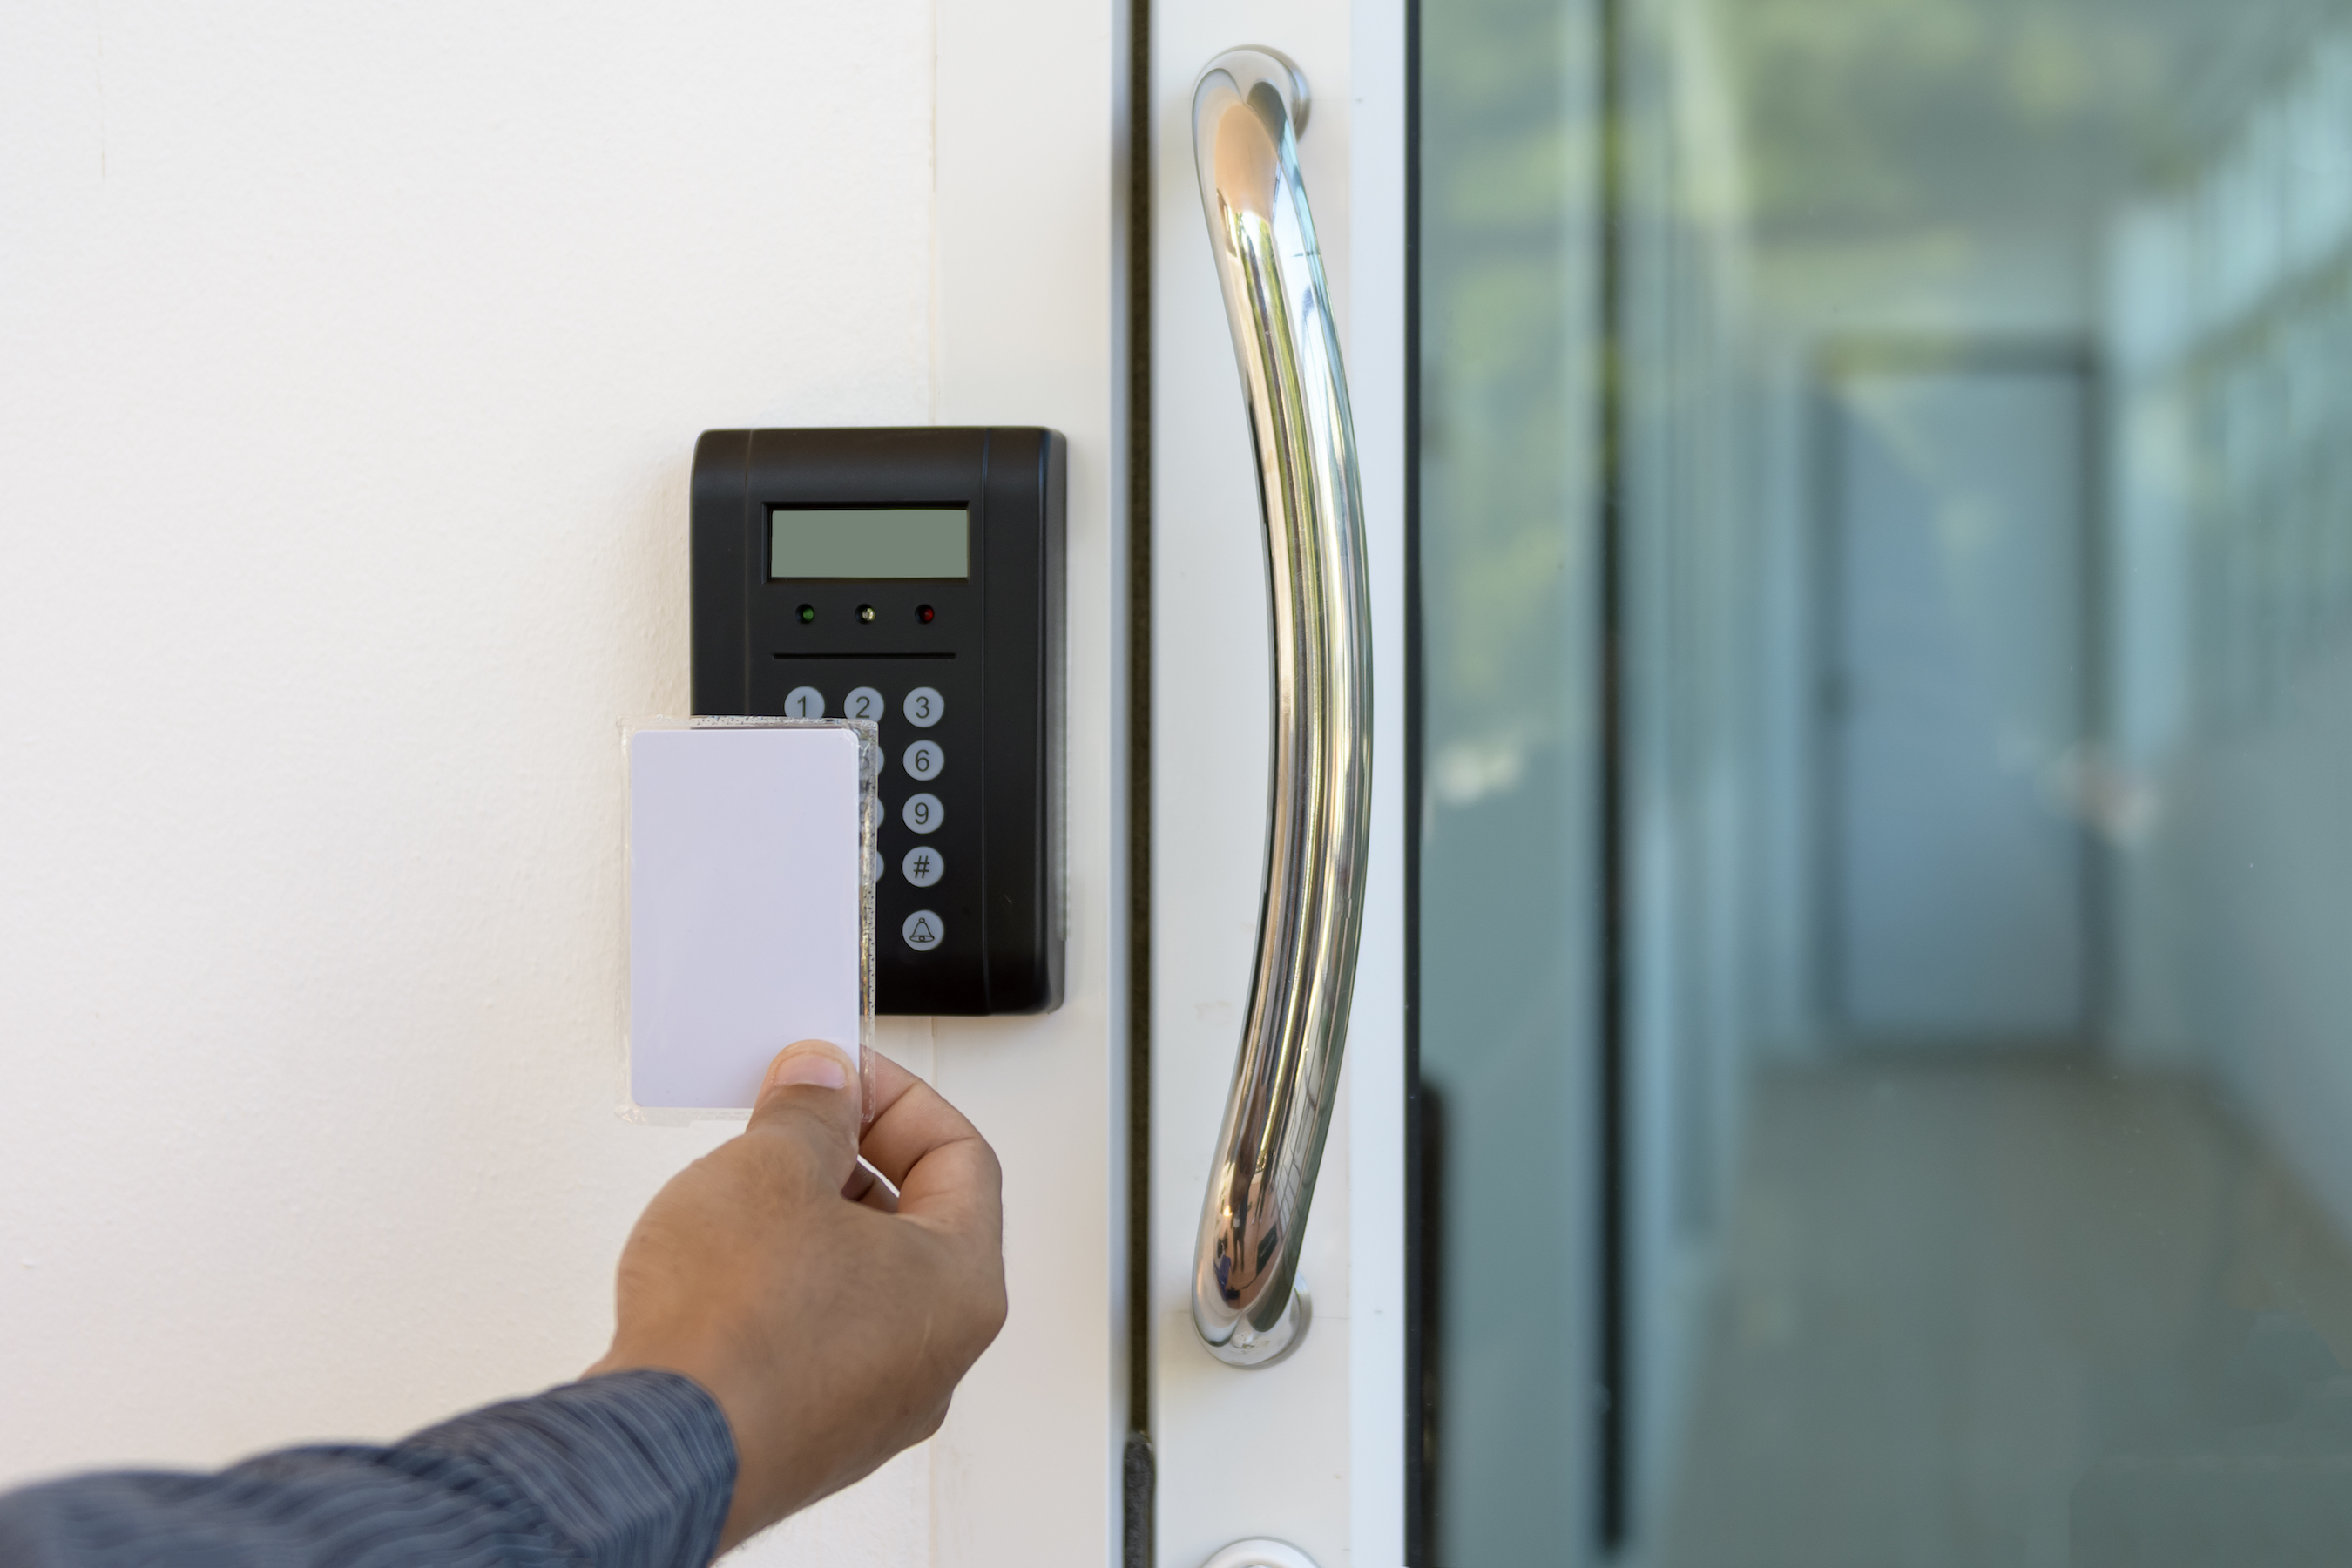 Access Control Security Integrators Locksmith Tampa Security Lock Systems 813-874-1608